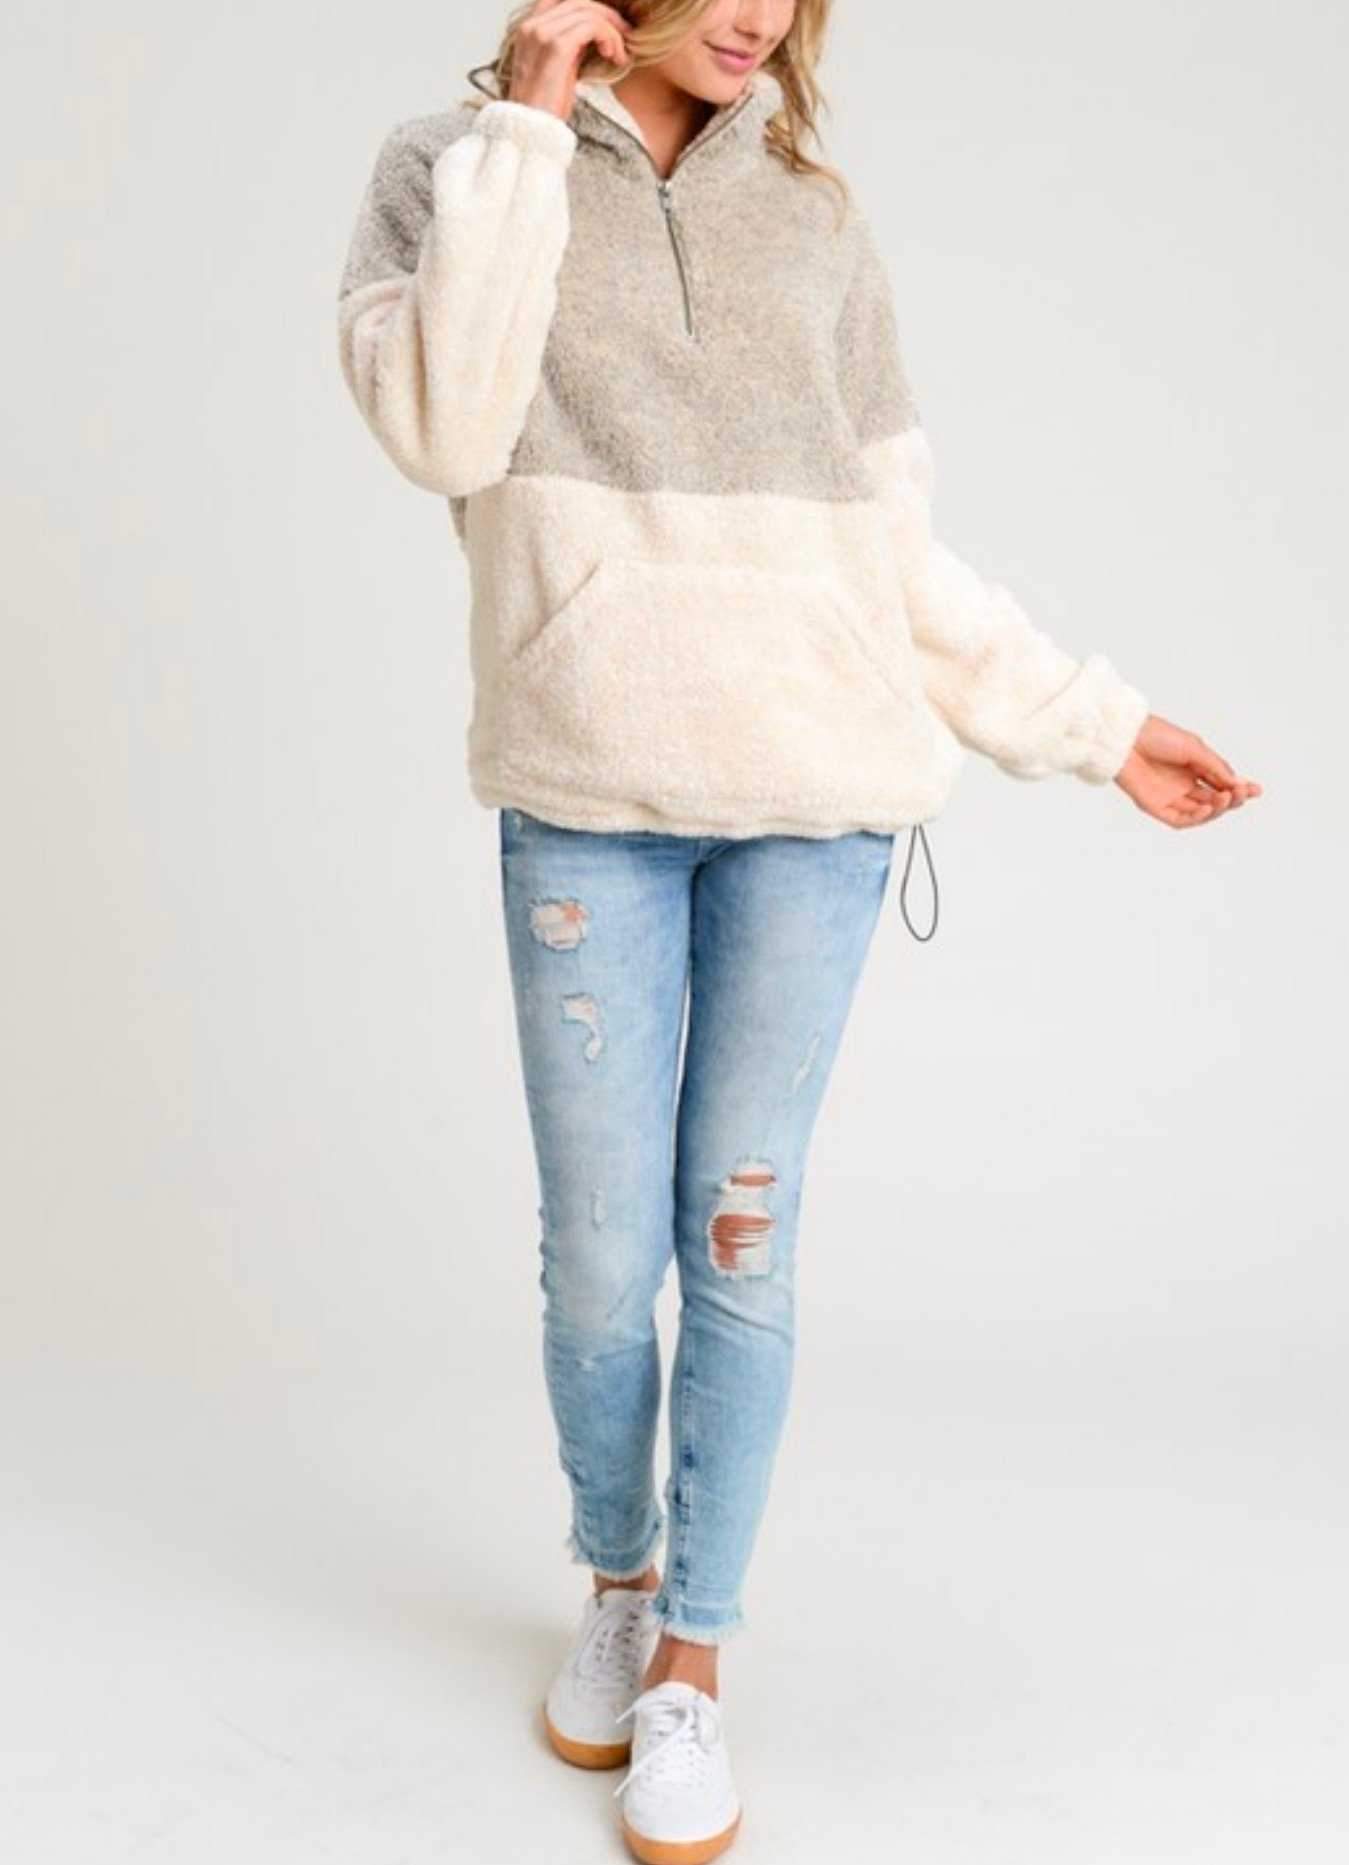 Two Toned Fuzzy Sherpa Fleece Pullover Jacket on sale - SOUISEE